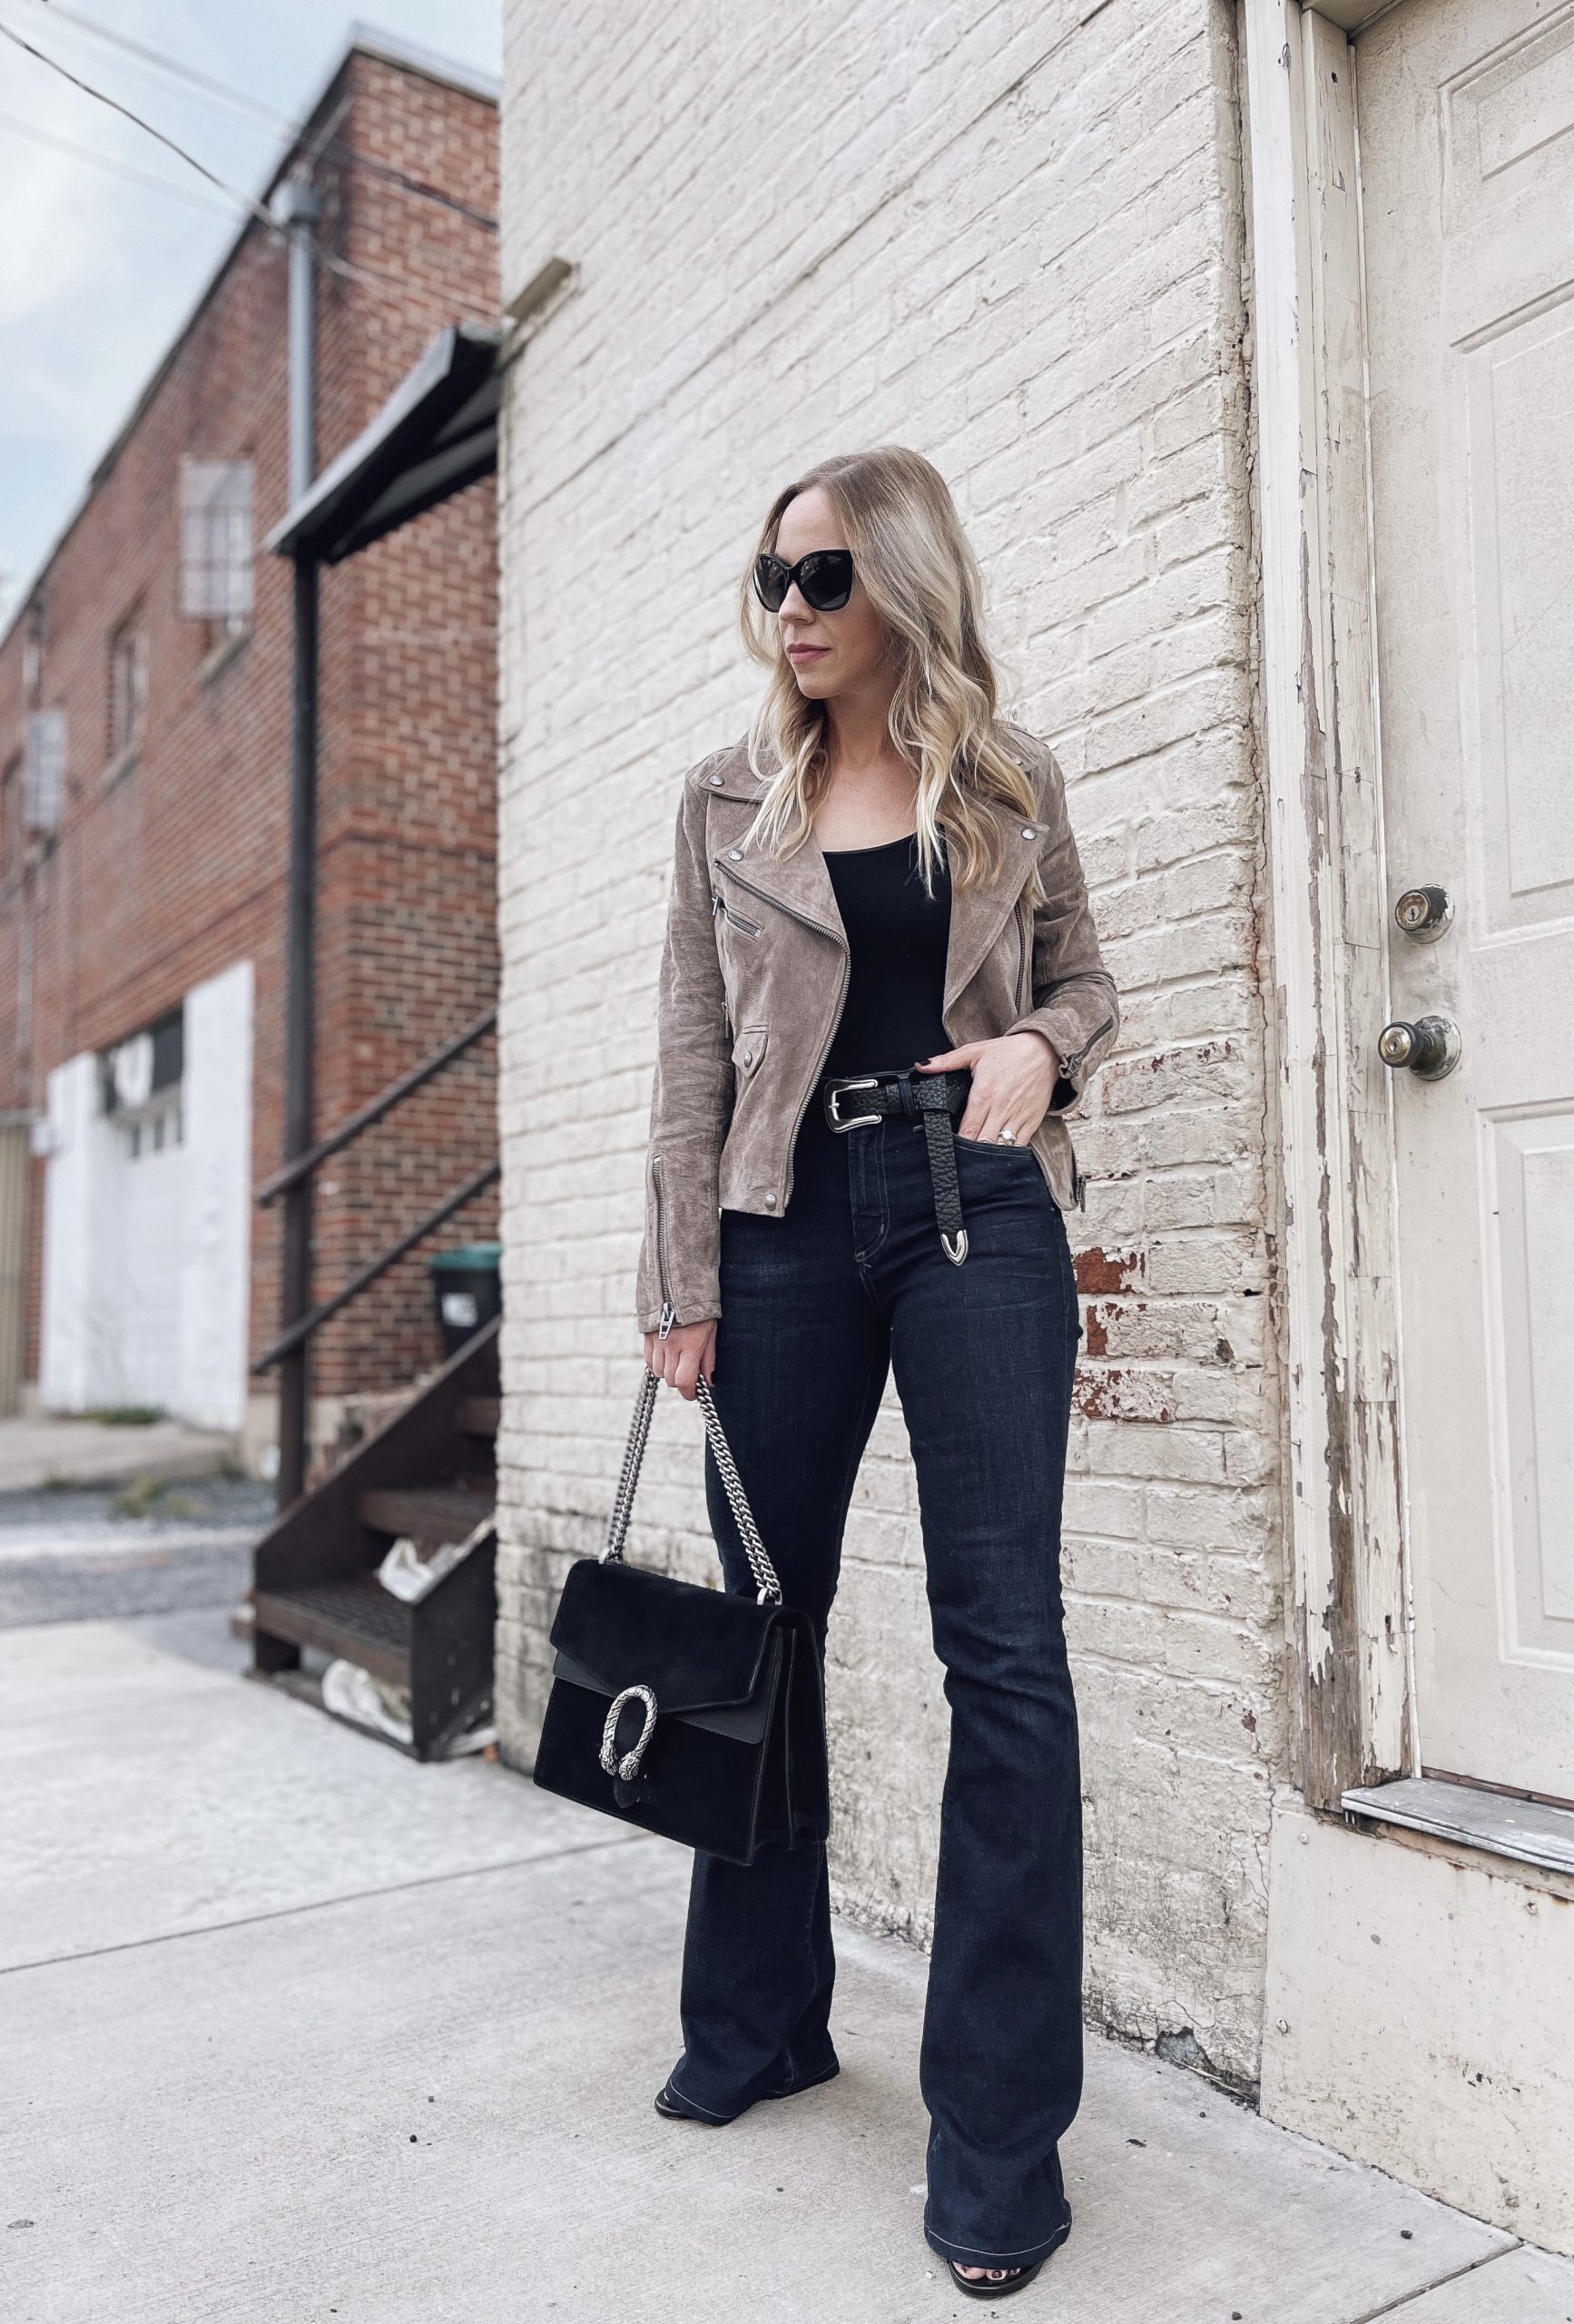 https://www.meagansmoda.com/wp-content/uploads/2021/09/Meagan-Brandon-of-Meagans-Moda-shares-fall-denim-trends-for-2021-flare-jeans-and-how-to-wear-them-scaled.jpg